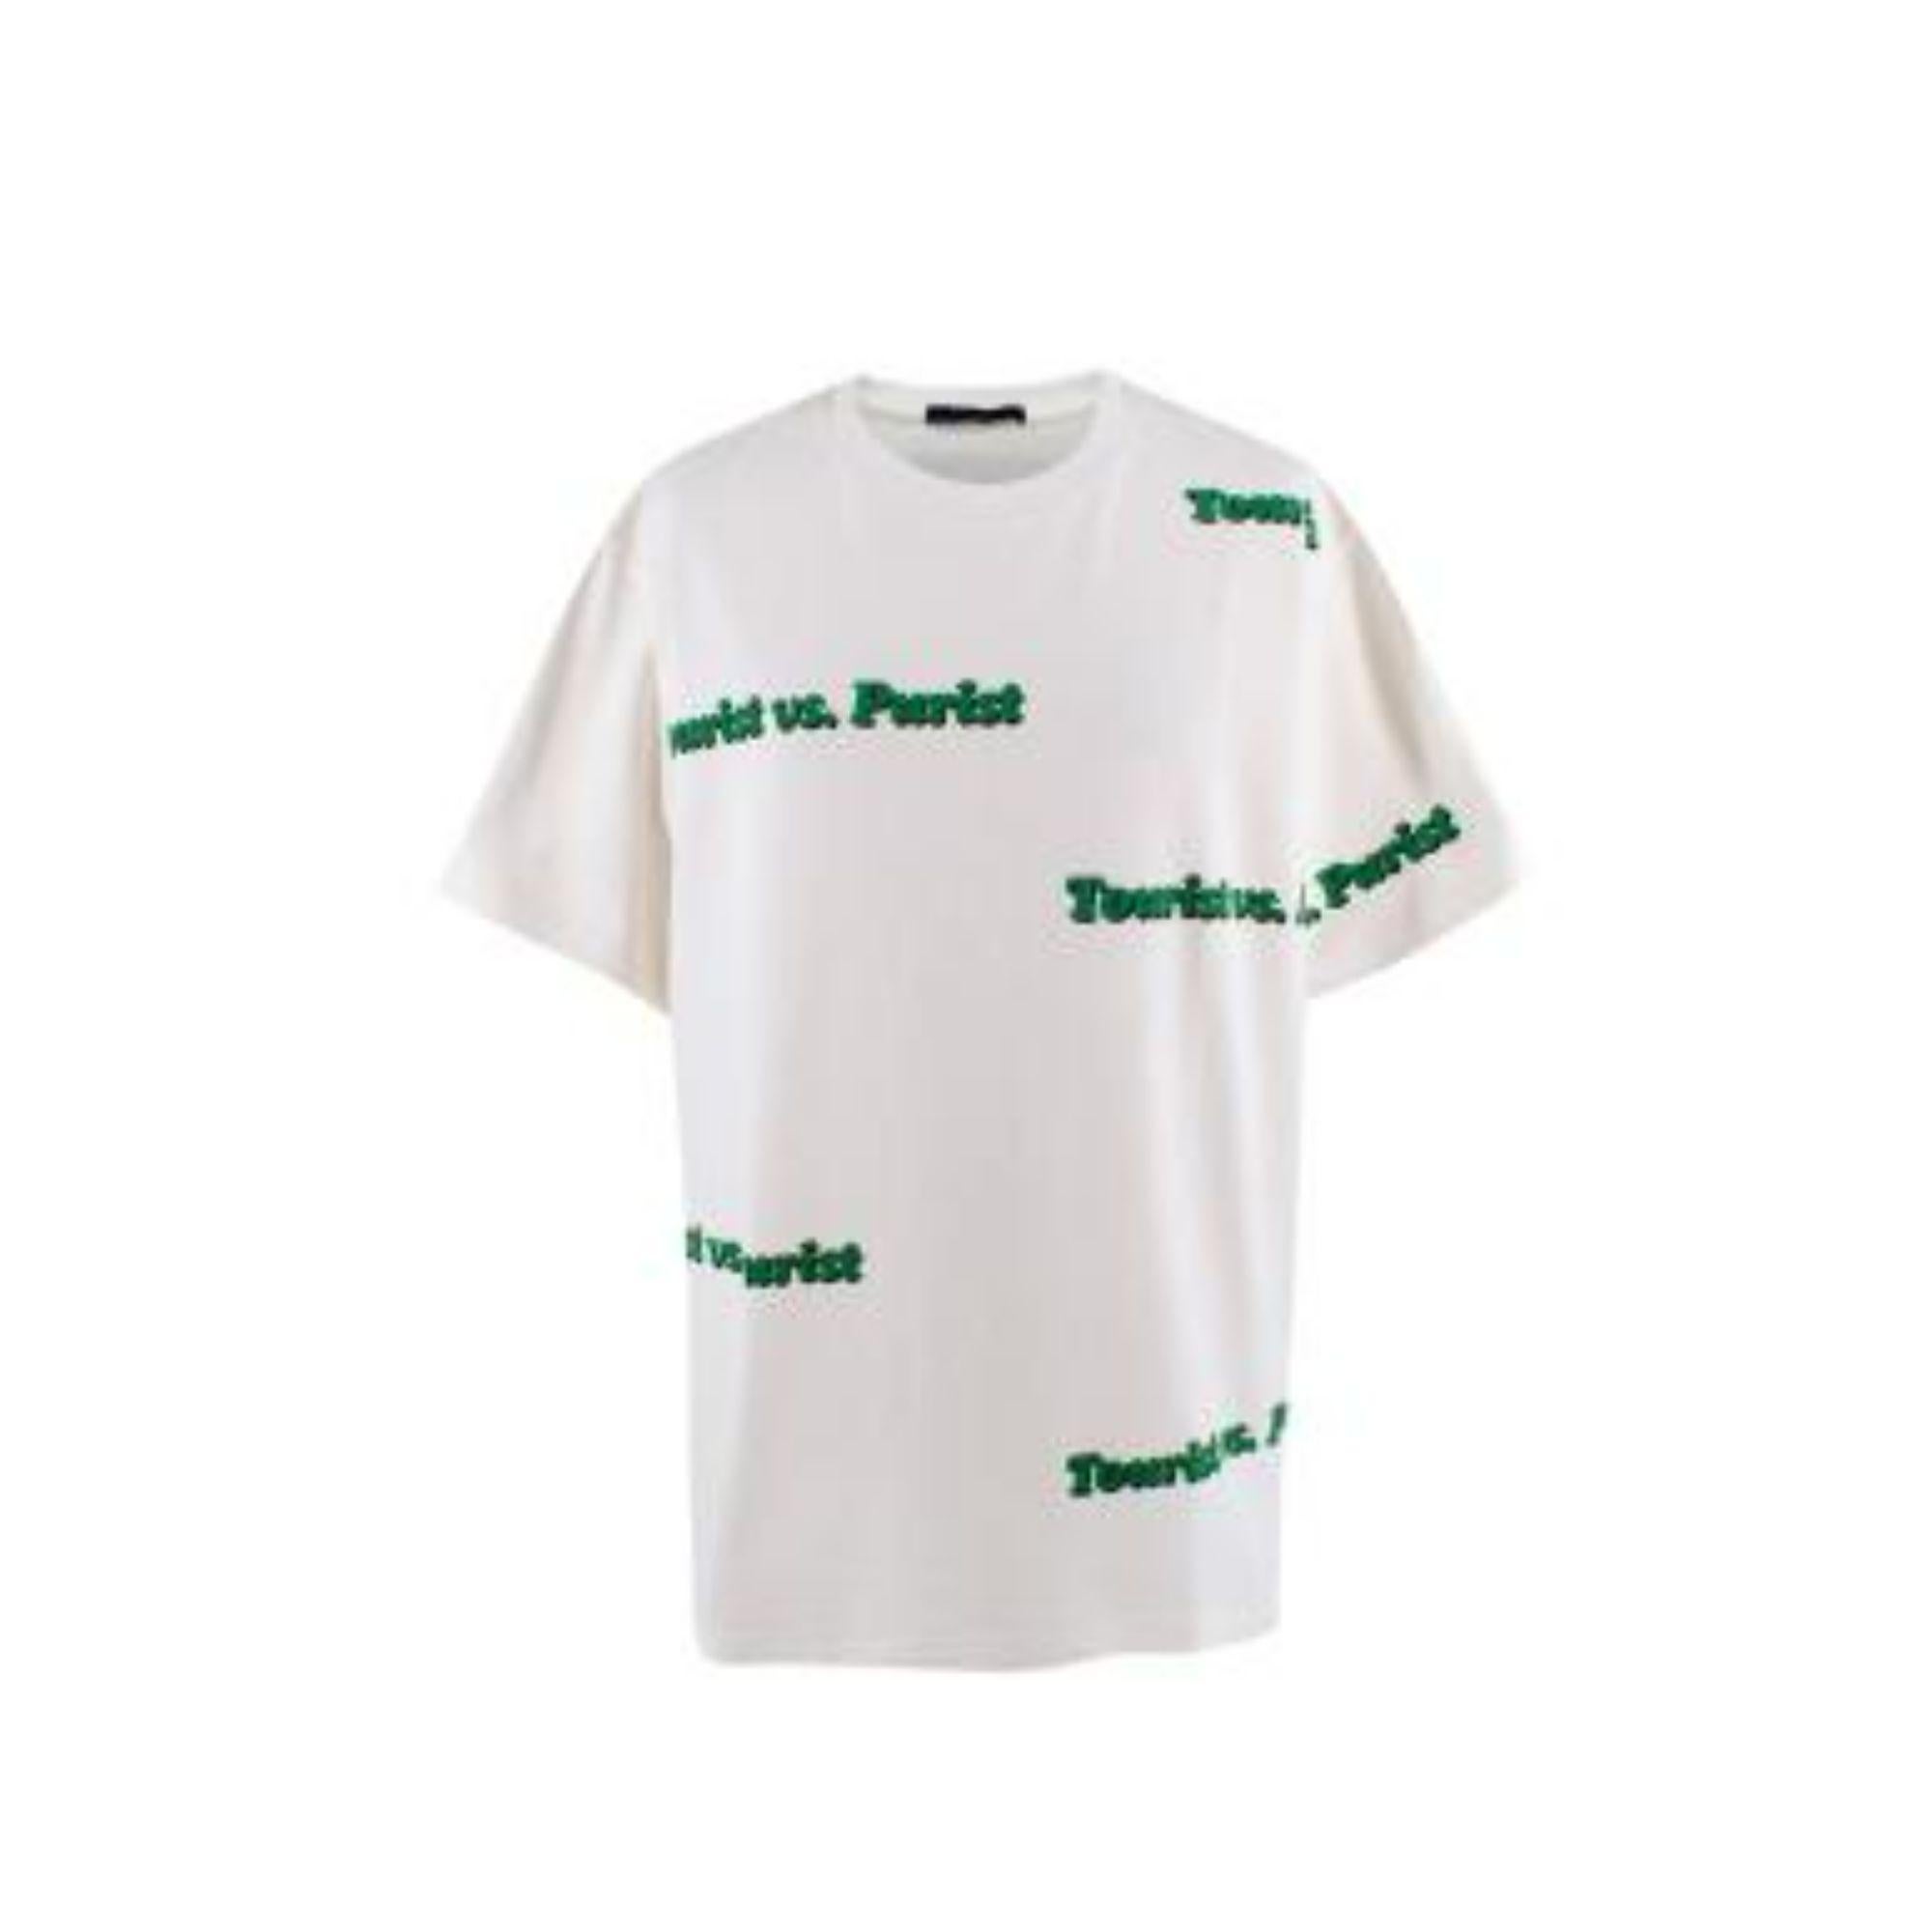 Louis Vuitton Tourist vs Purist Cotton T-shirt

-Round neckline 
-Ribbed neckline 
-Dropped shoulders 
-Tourist Vs Purist green print body 
-Relaxed fit 

Material: 

100% Cotton 

PLEASE NOTE, THESE ITEMS ARE PRE-OWNED AND MAY SHOW SIGNS OF BEING